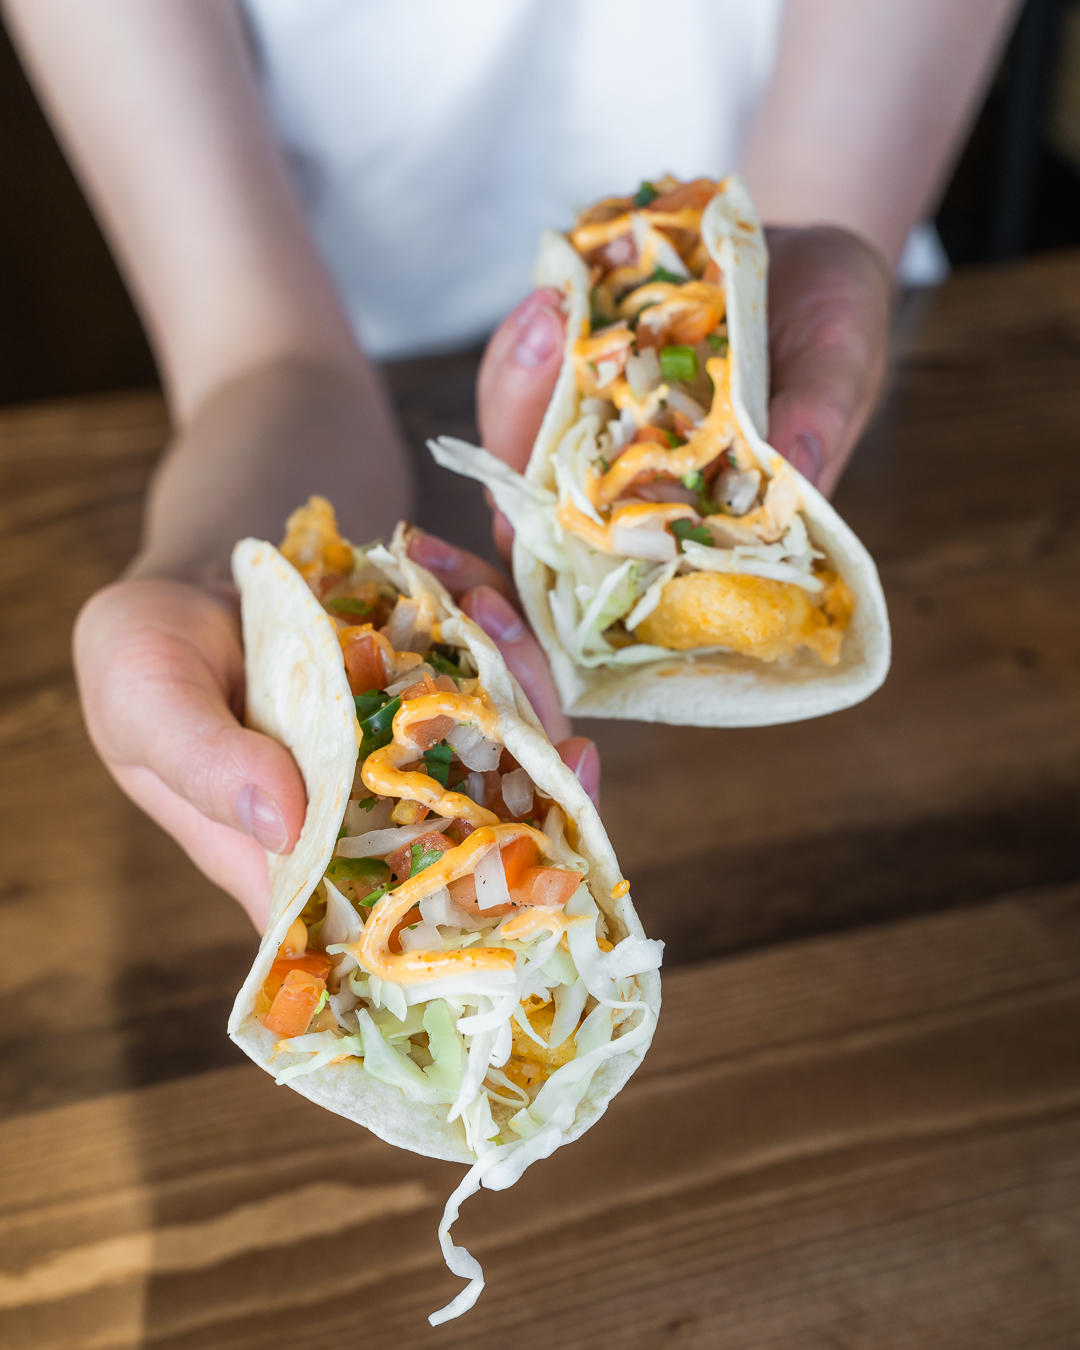 Street Tacos - Three flavour-filled mini tacos with Joey's Famous Fish, shredded cabbage, cheese, fr Joey's Fish Shack Medicine Hat (403)487-4883